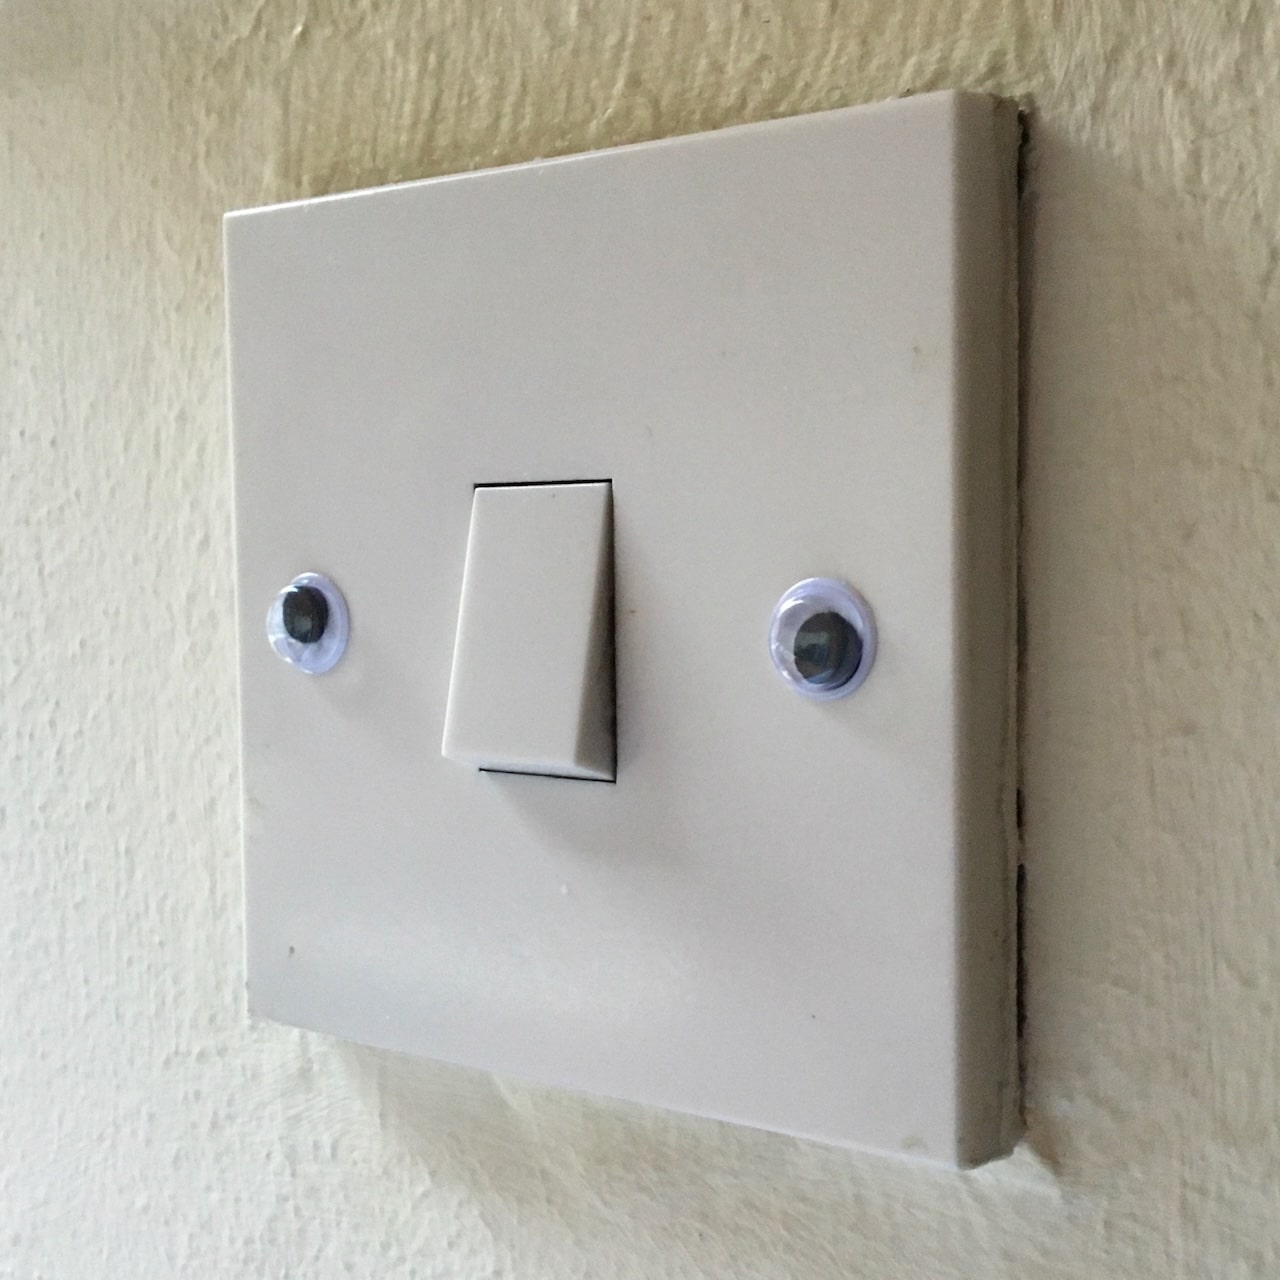 Light Switch With Stick on Eyes